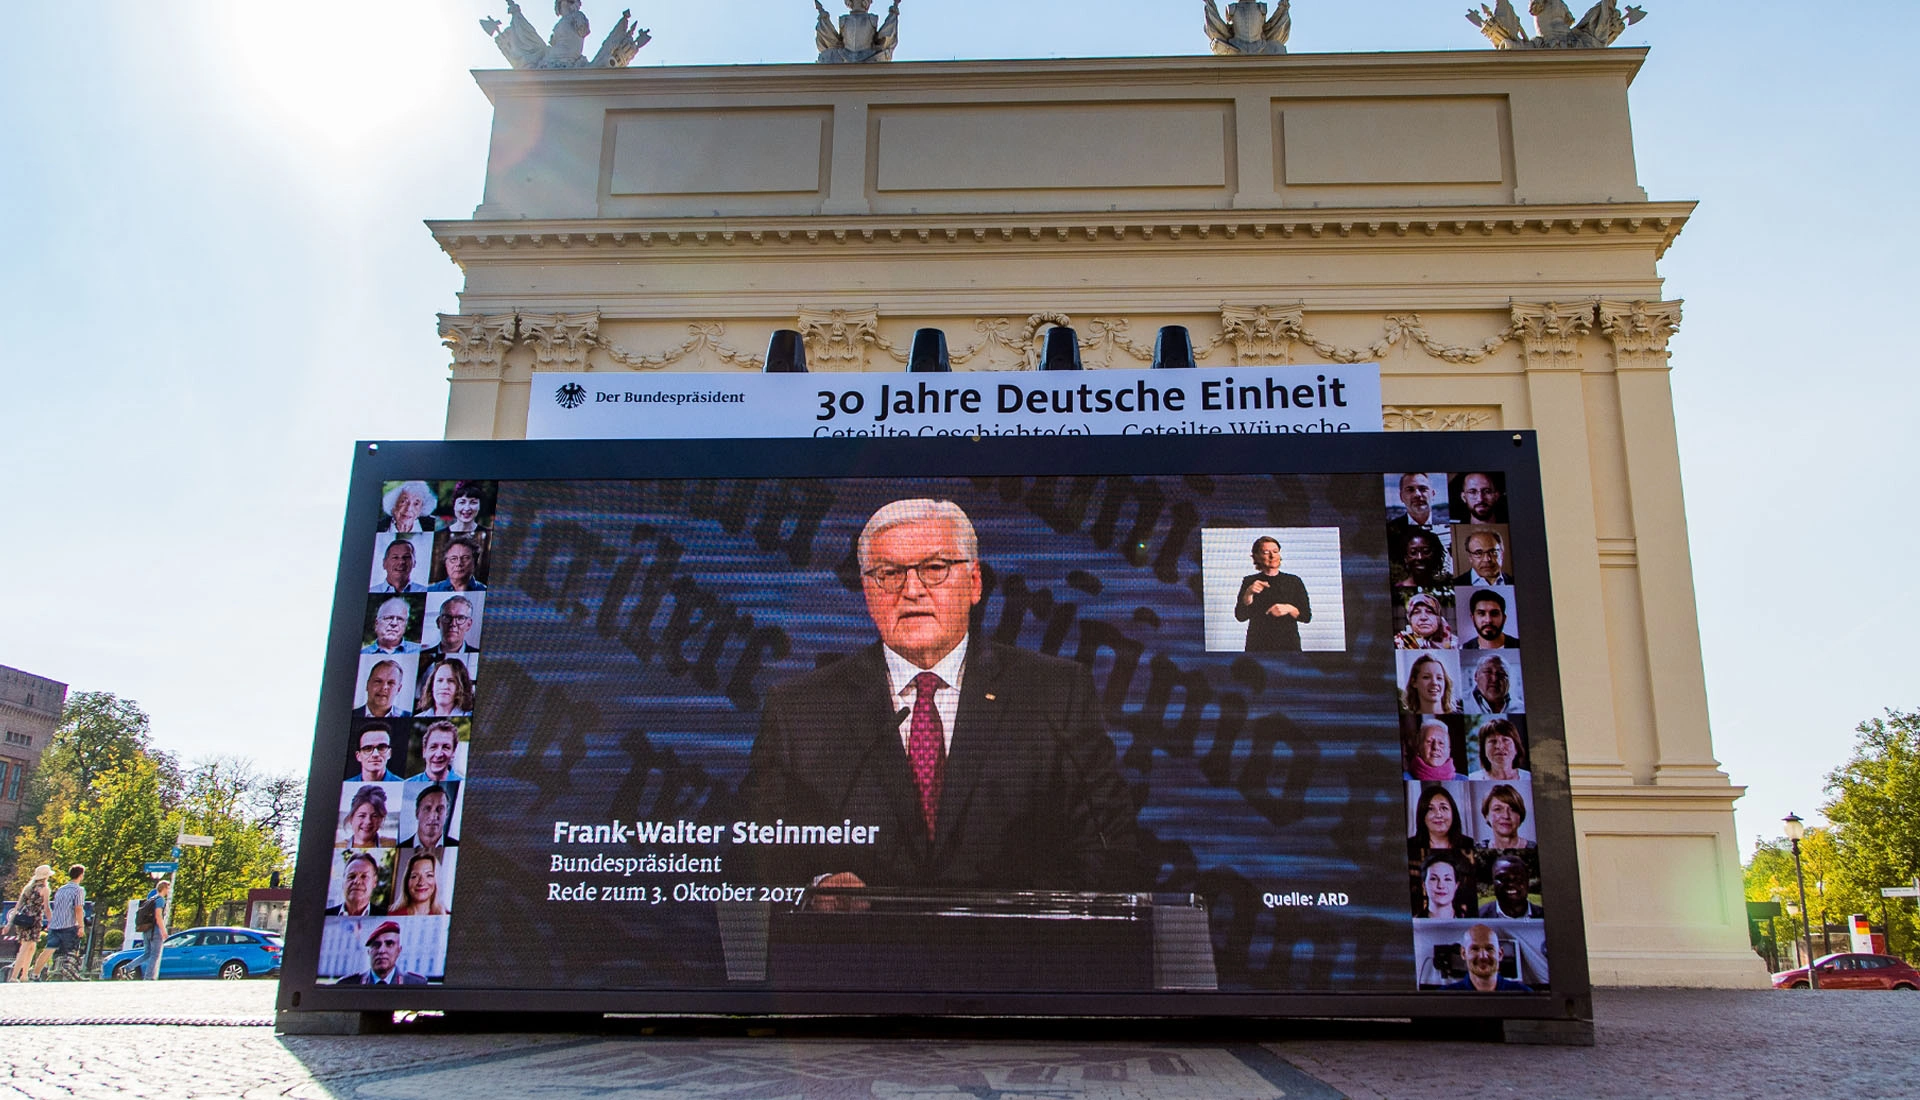 A picture shows Federal President Frank-Walter Steinmeier giving a speech to mark the anniversary 